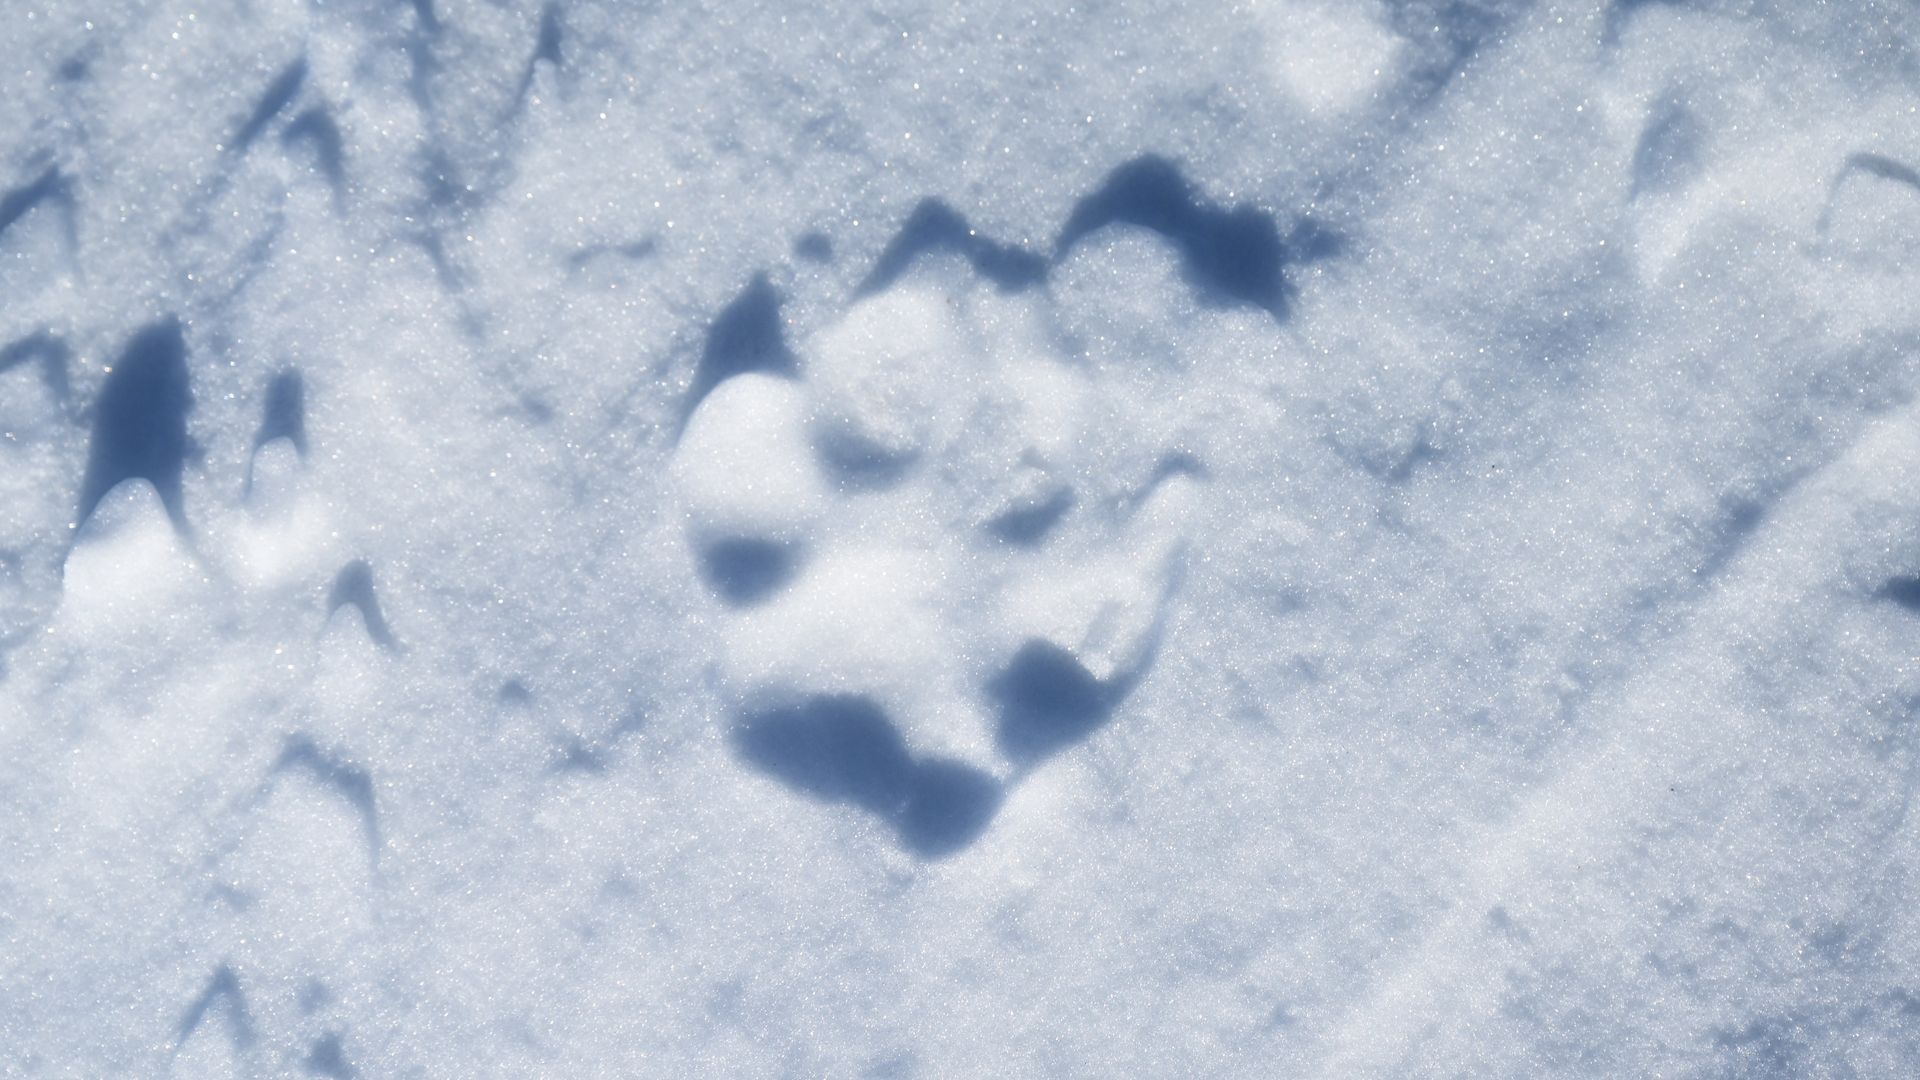 A wolf track is seen in the snow near Walden in 2022. Photo: RJ Sangosti/Denver Post via Getty Images